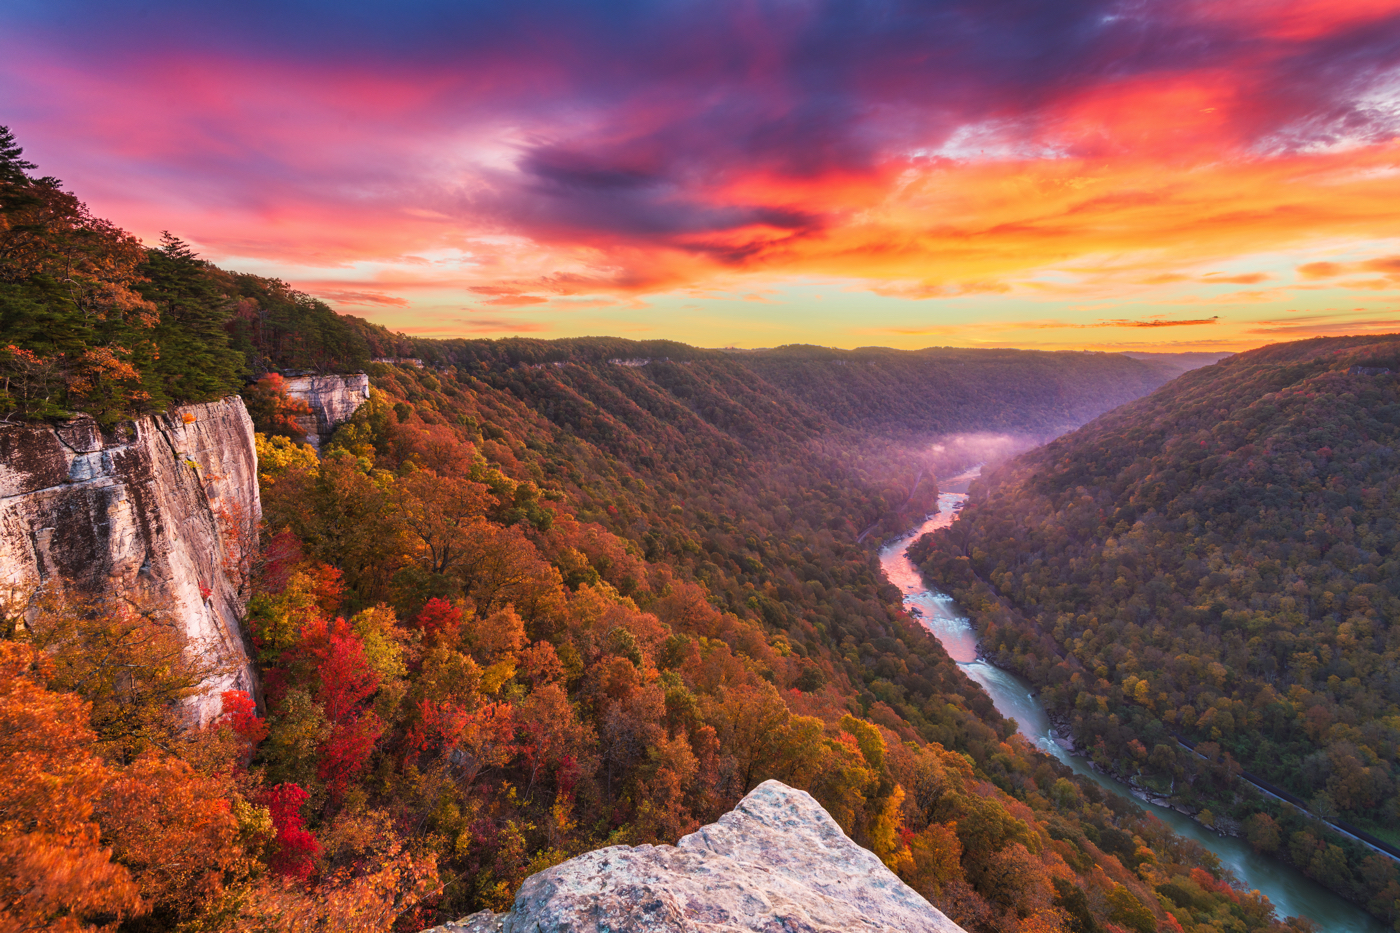 20 BEST THINGS TO DO IN WEST VIRGINIA YOU'LL LOVE